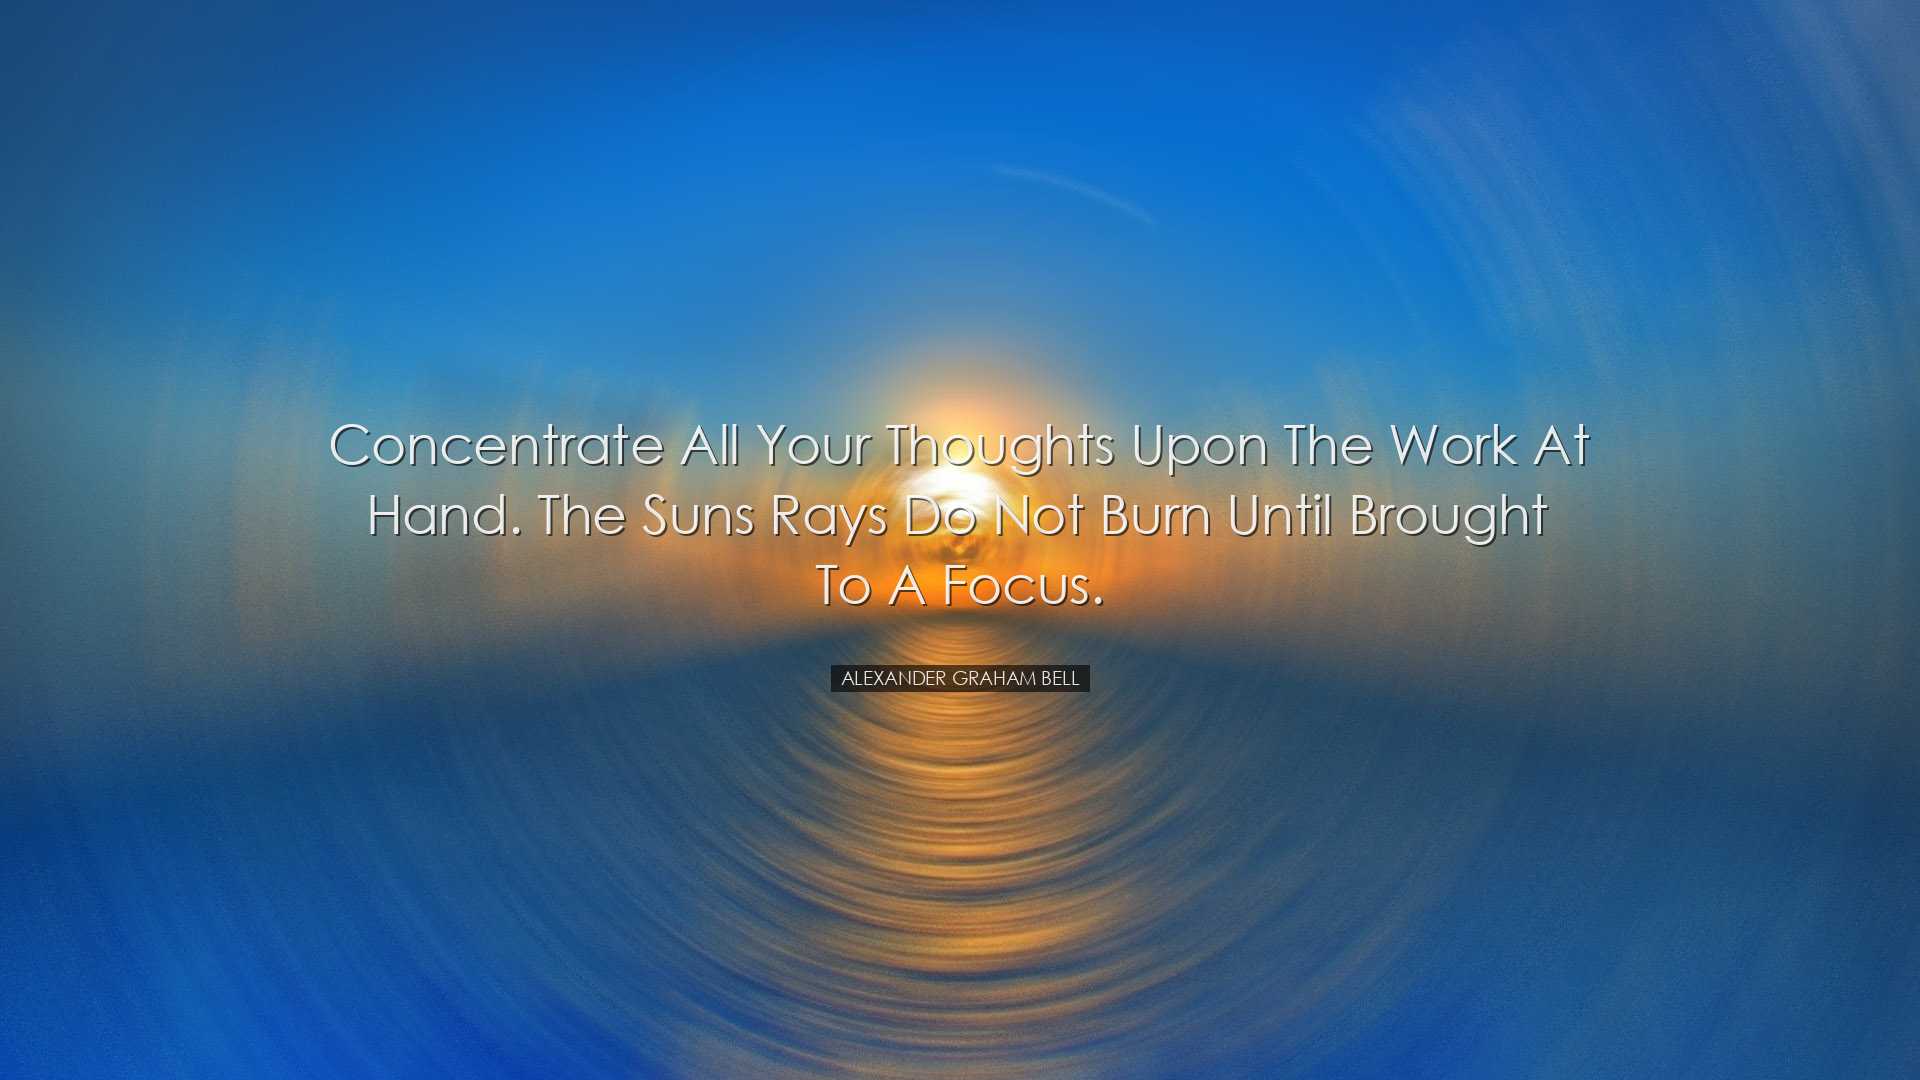 Concentrate all your thoughts upon the work at hand. The suns rays